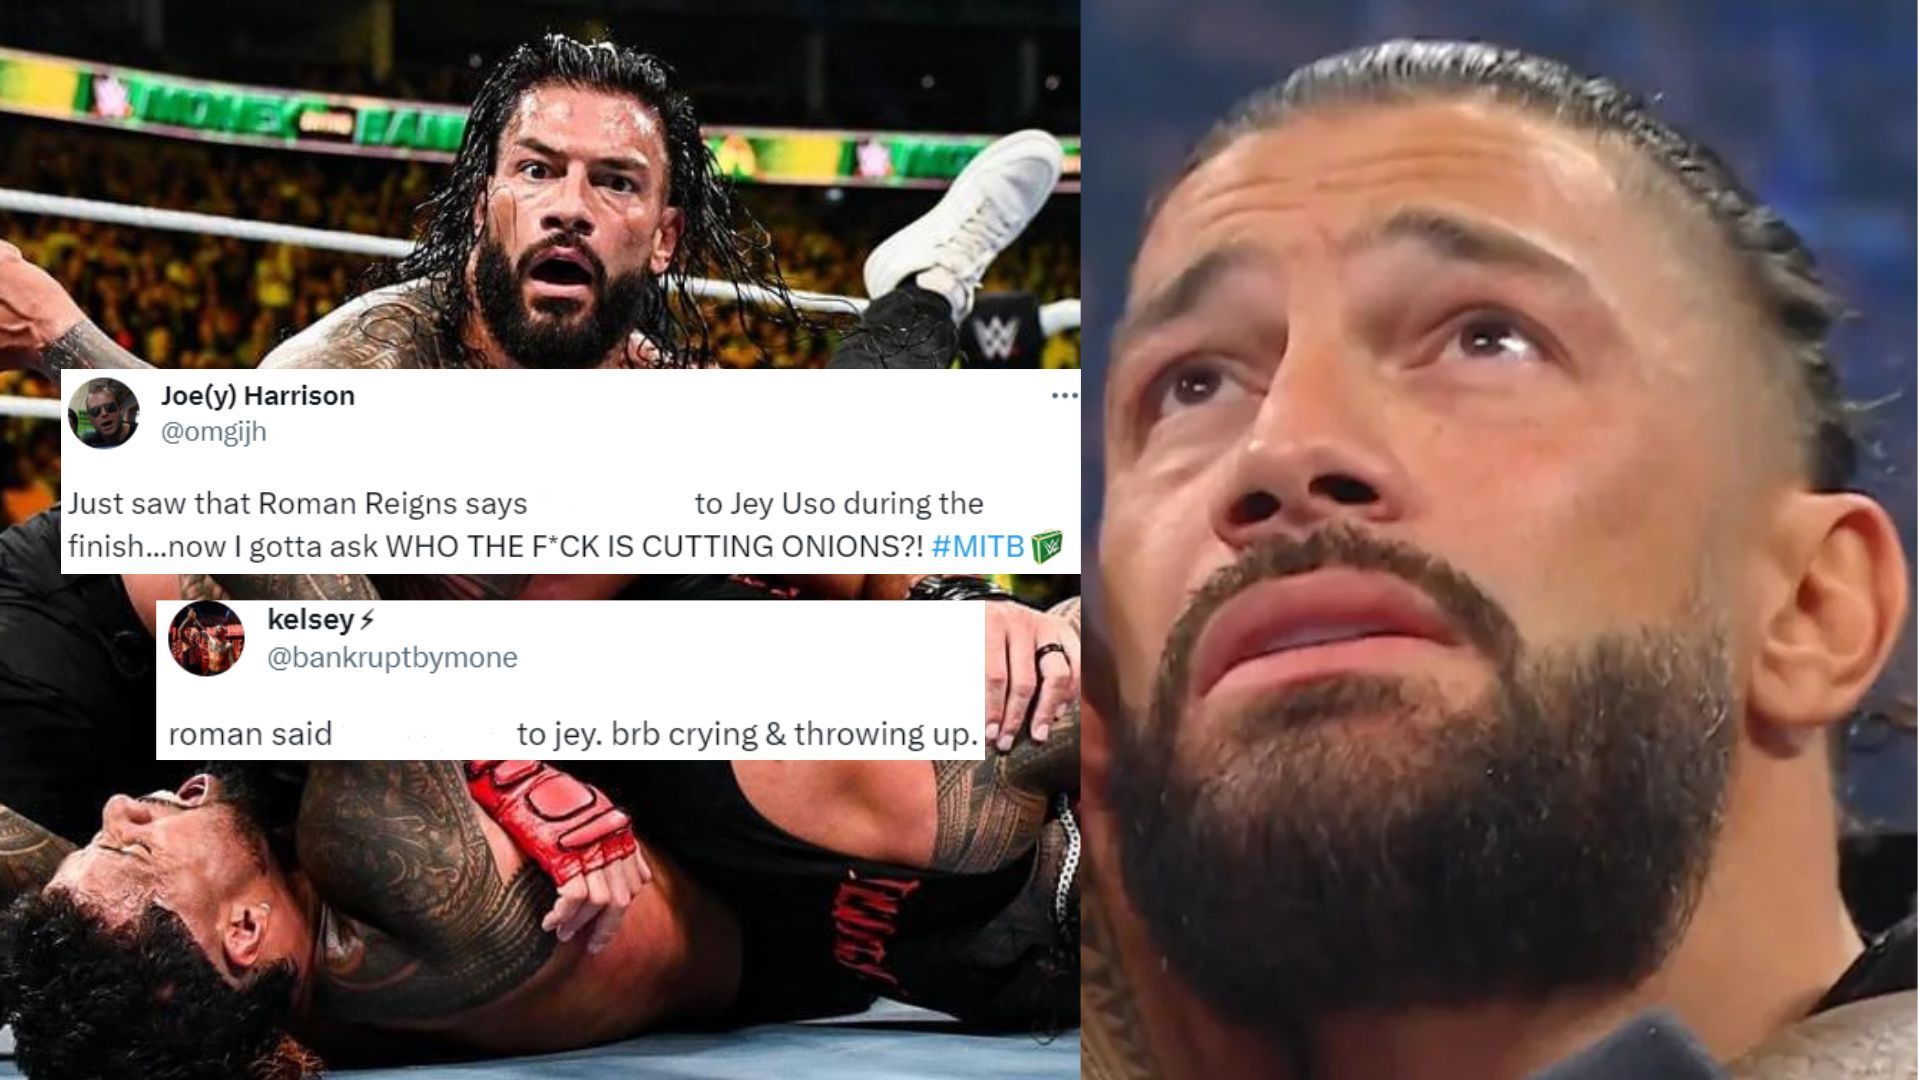 Roman Reigns had a message for Jey Uso.